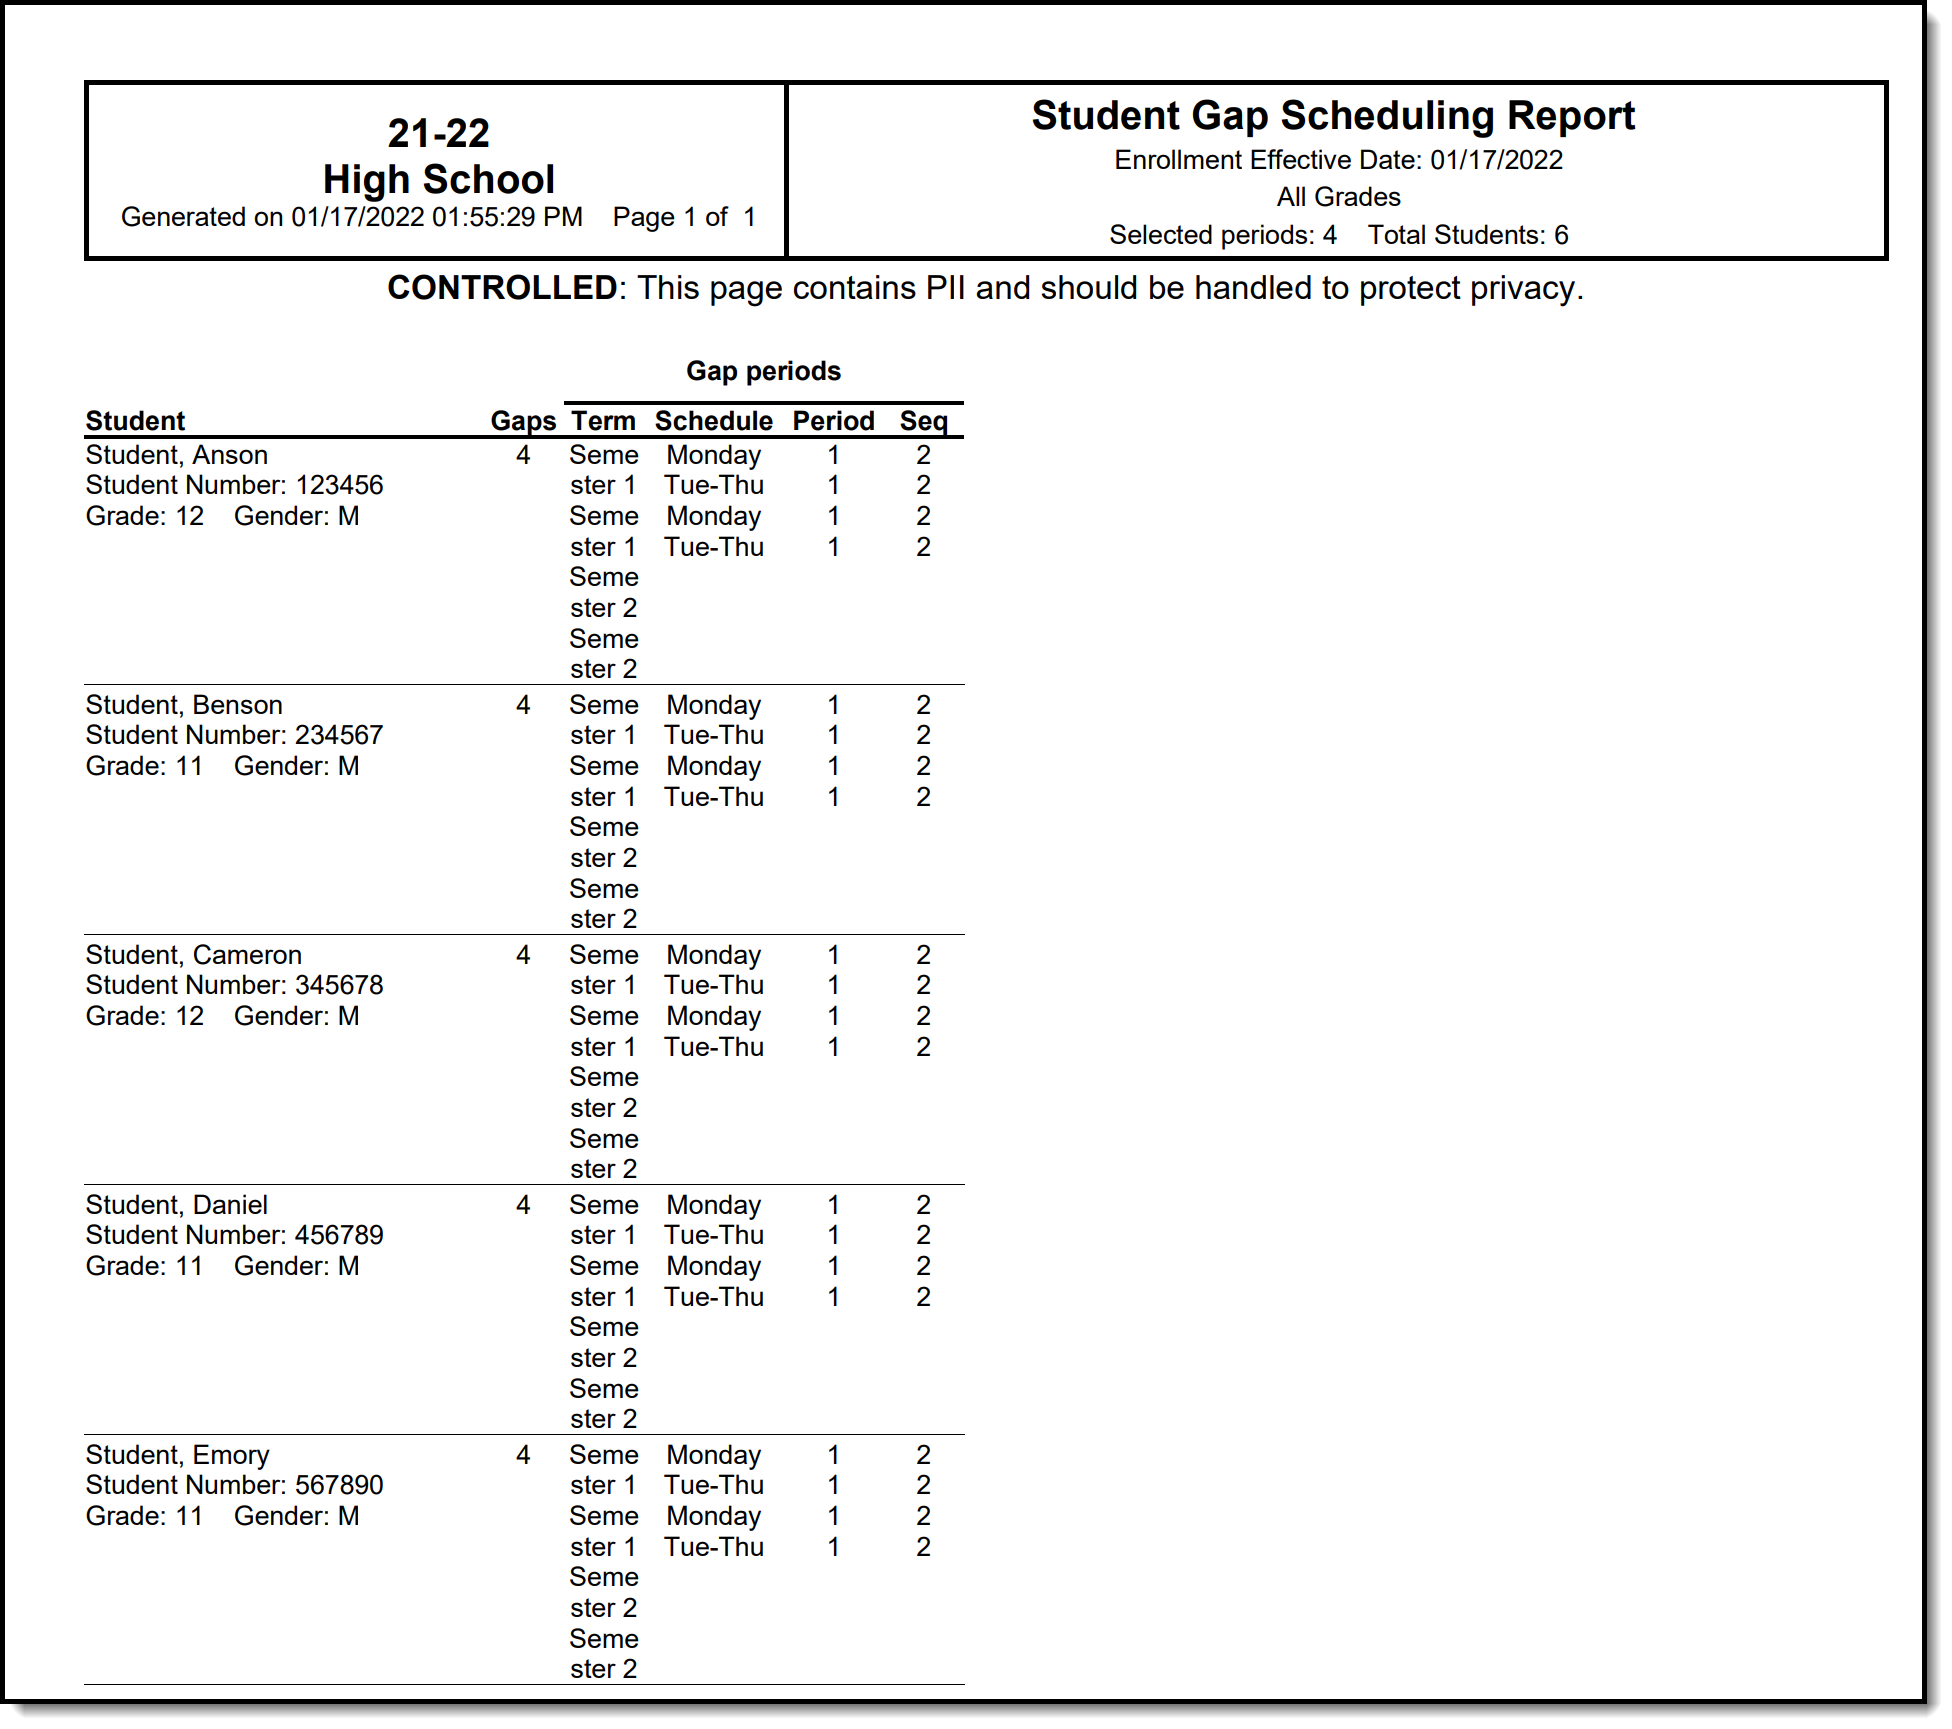 Screenshot of the Student Gap Scheduling Report in Summary Format